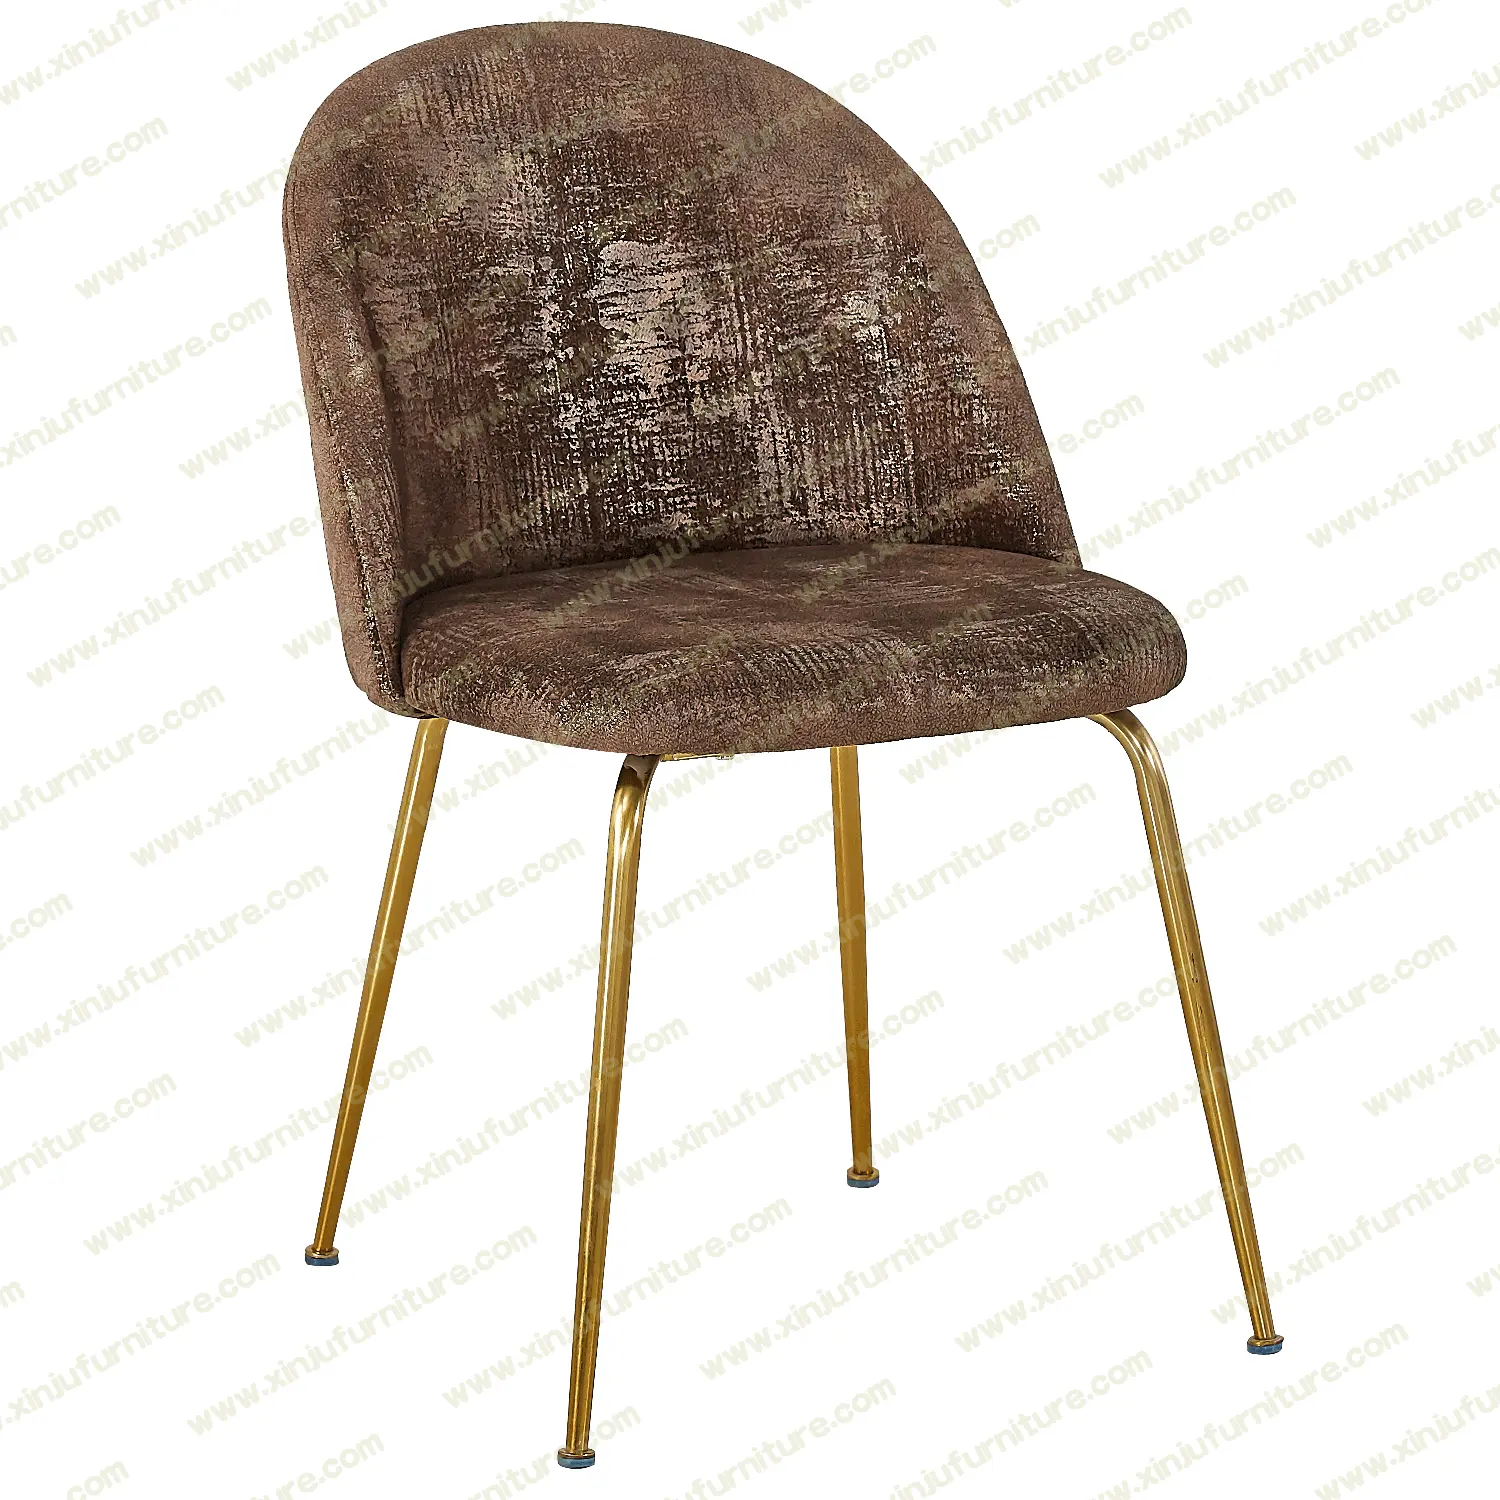 Retro style filling dining chair